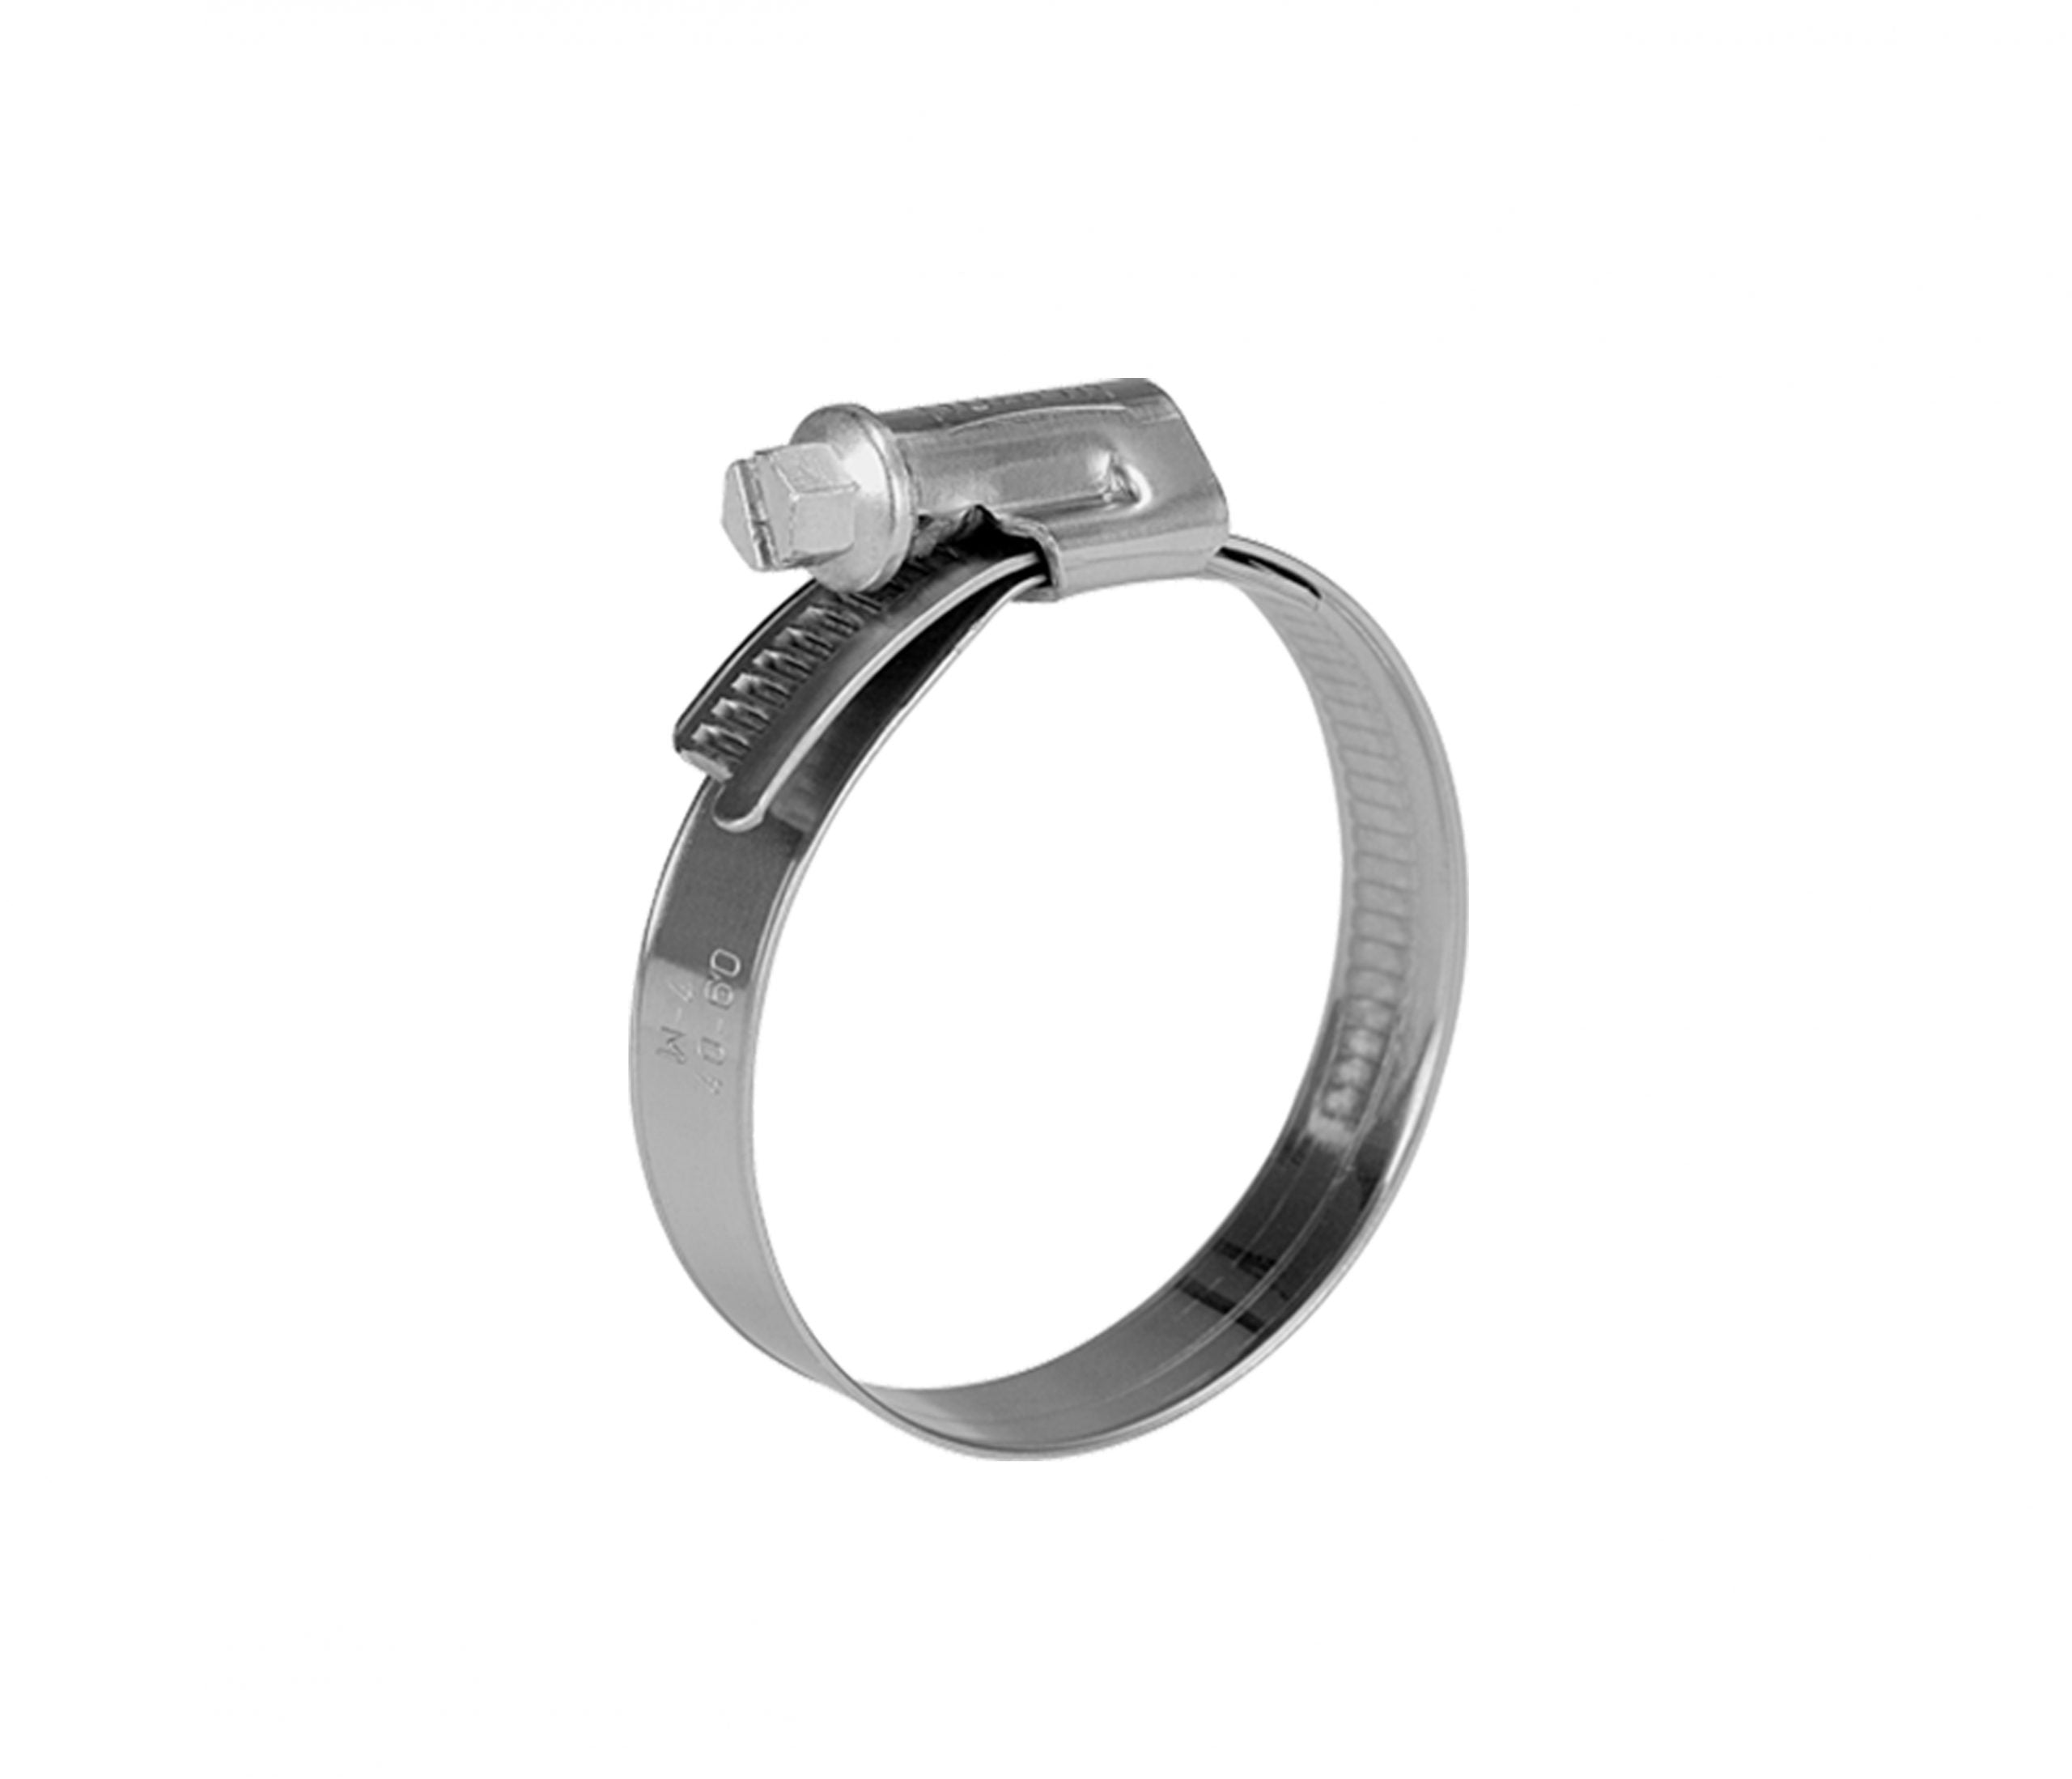 35-50mm Stainless Steel Hose Clamp with Worm Drive 722-3550 by Norma